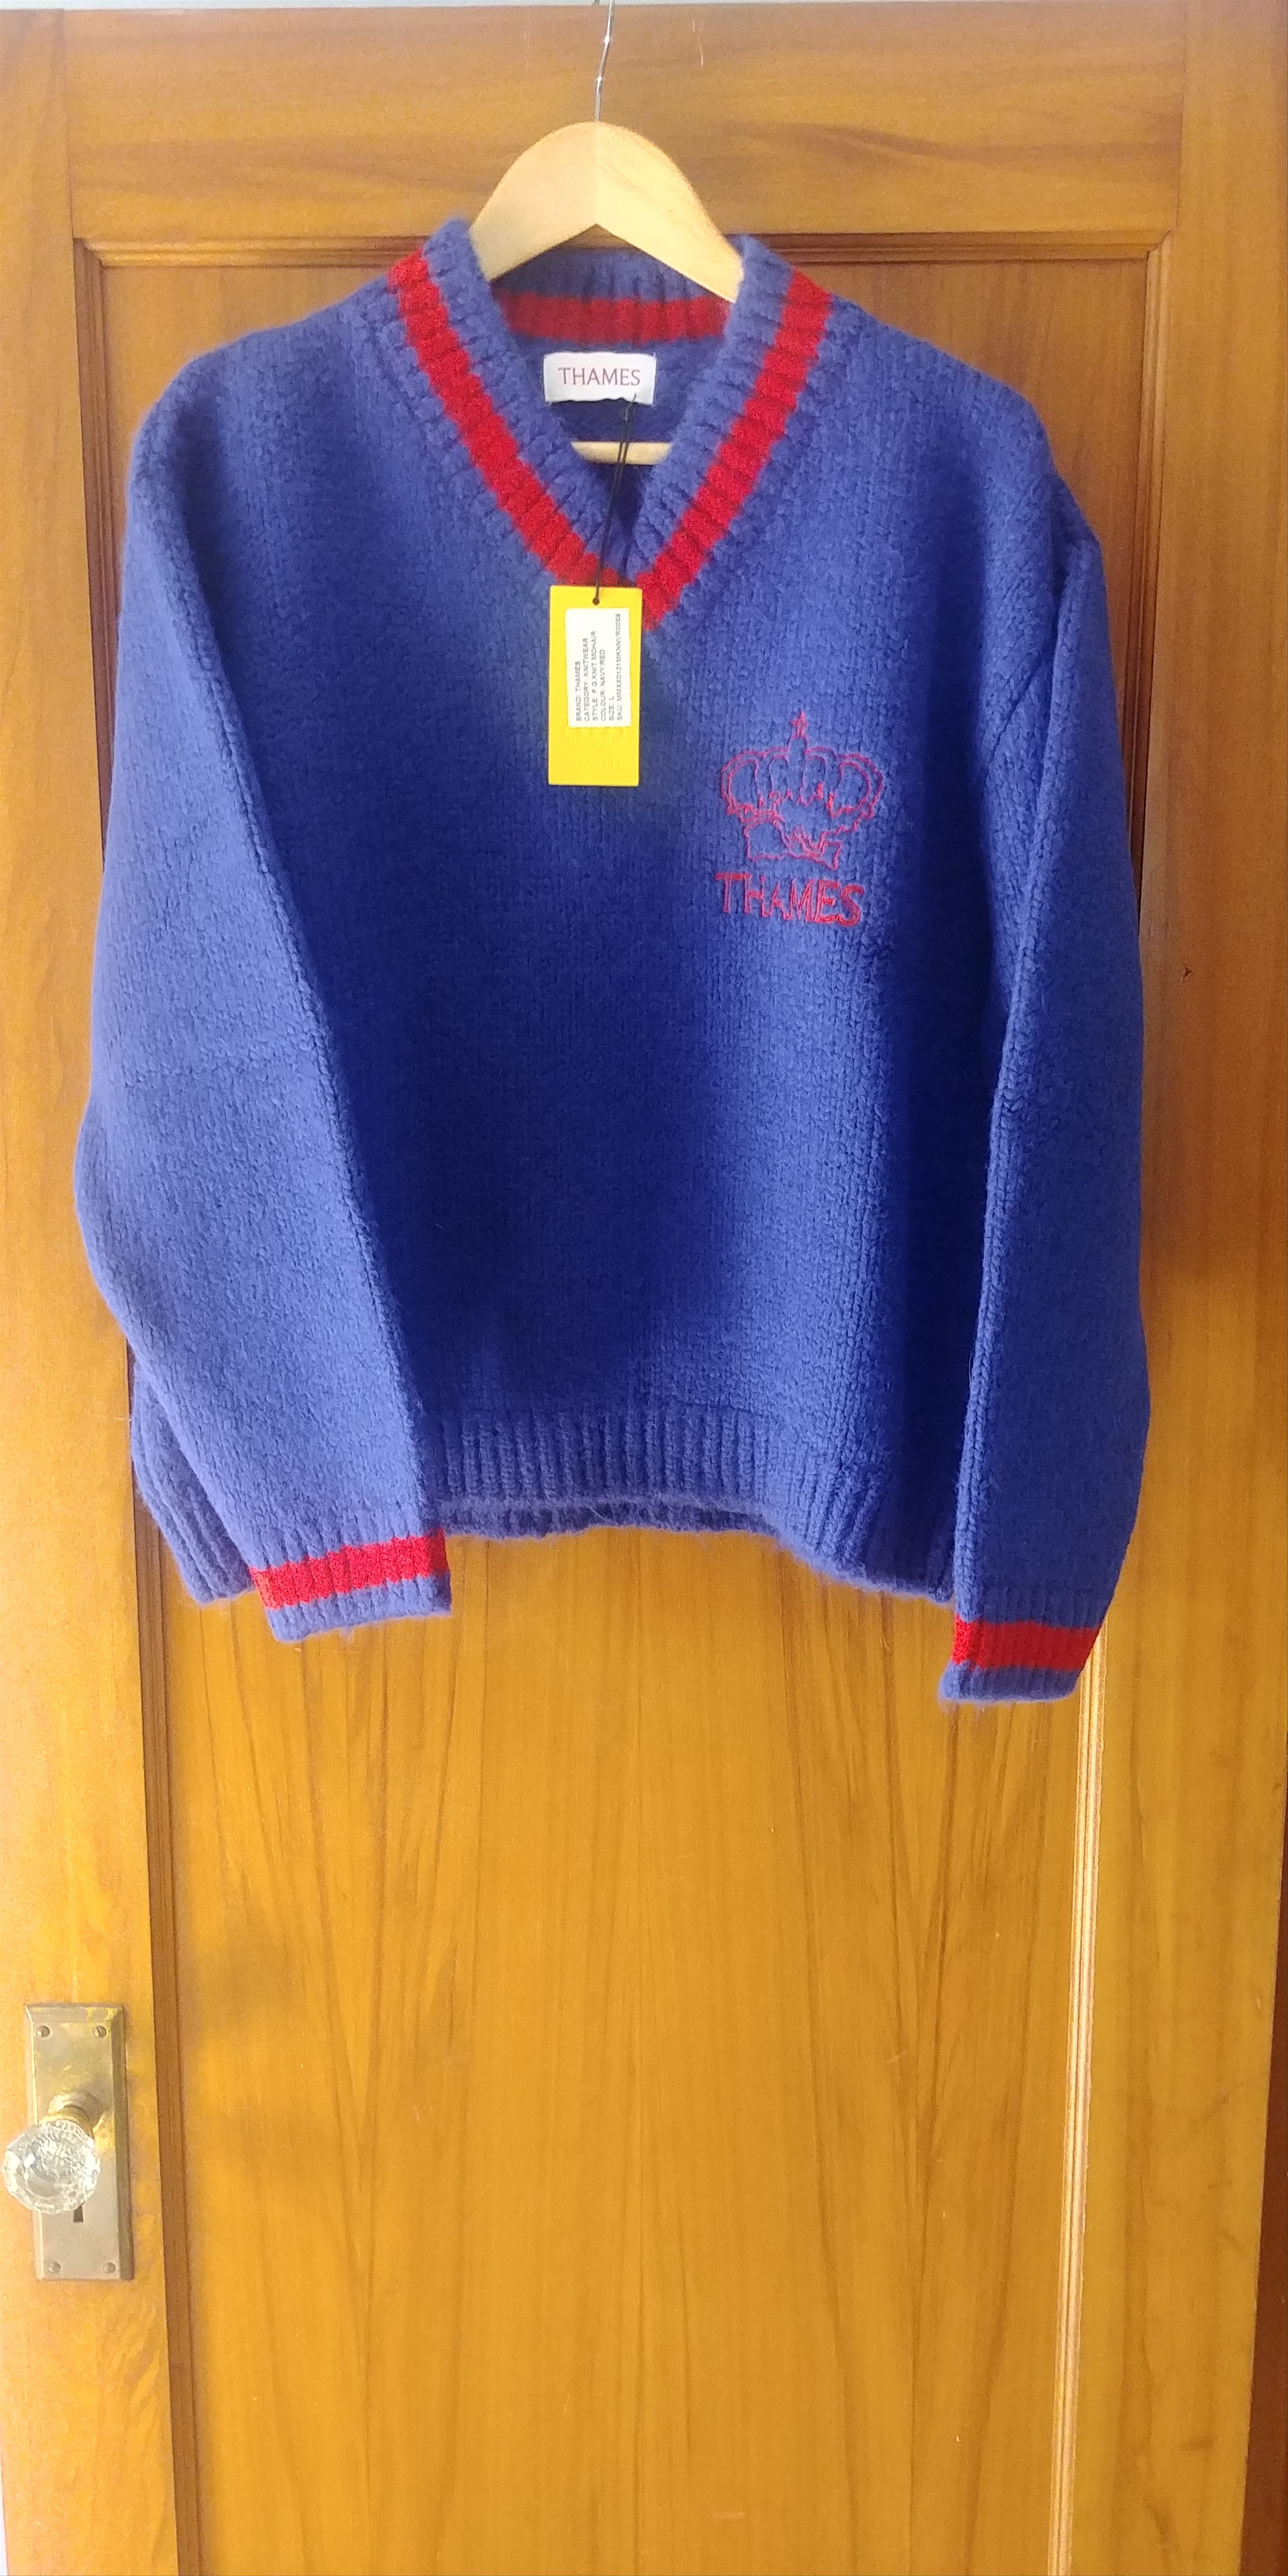 Thames Prussian Blue P.G Knit Sweater | Grailed